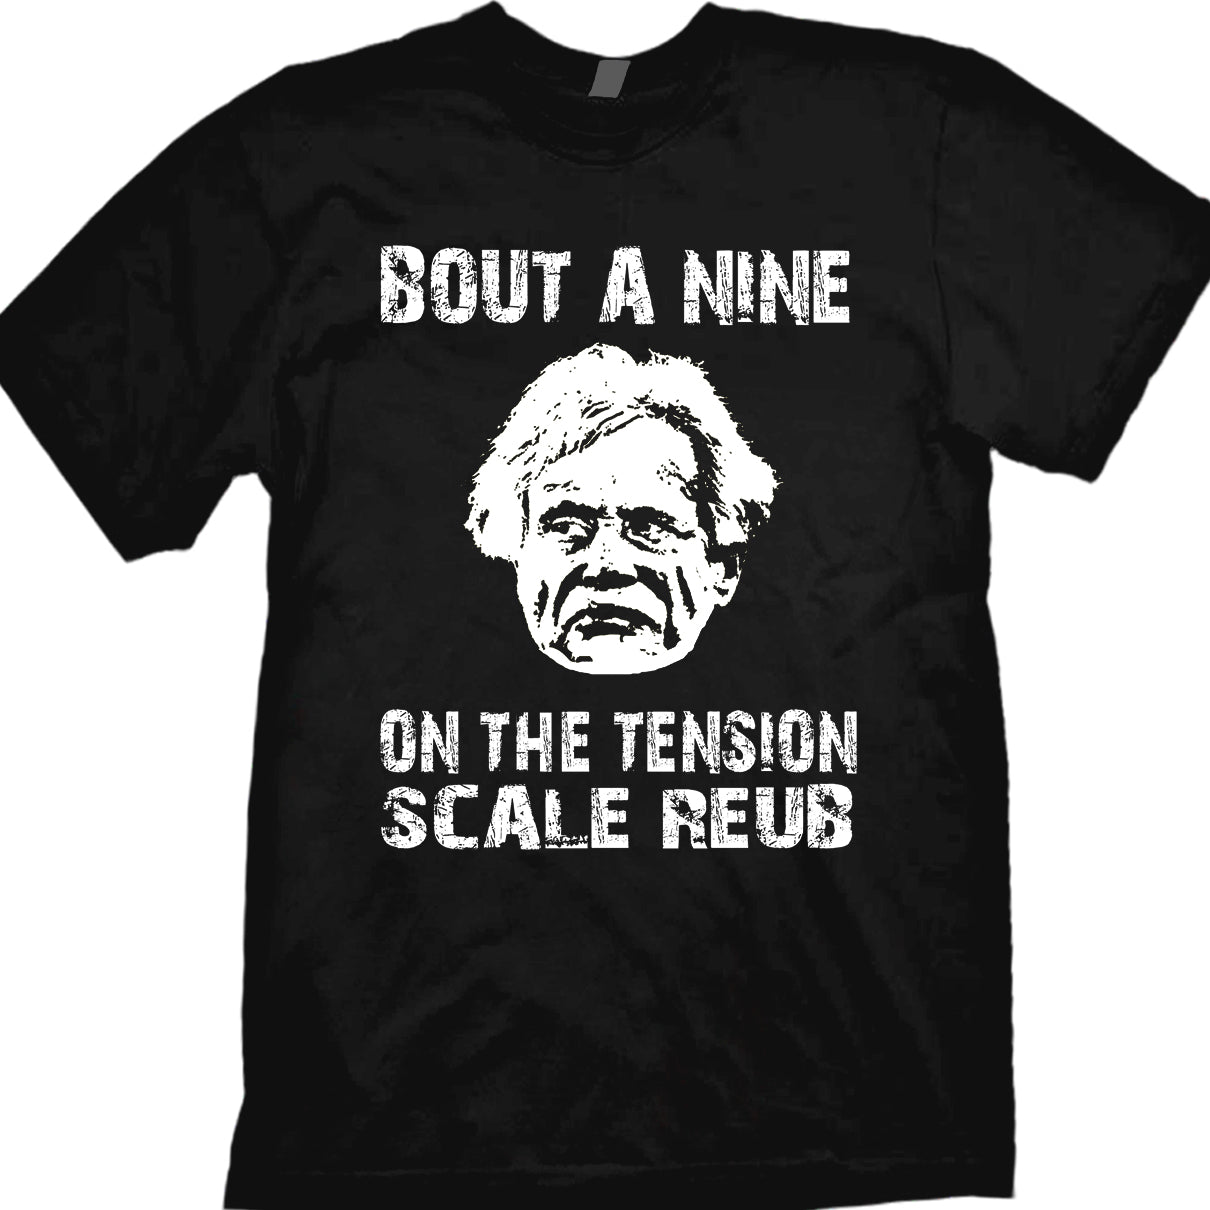 The Burbs T-shirt "Tension Scale"